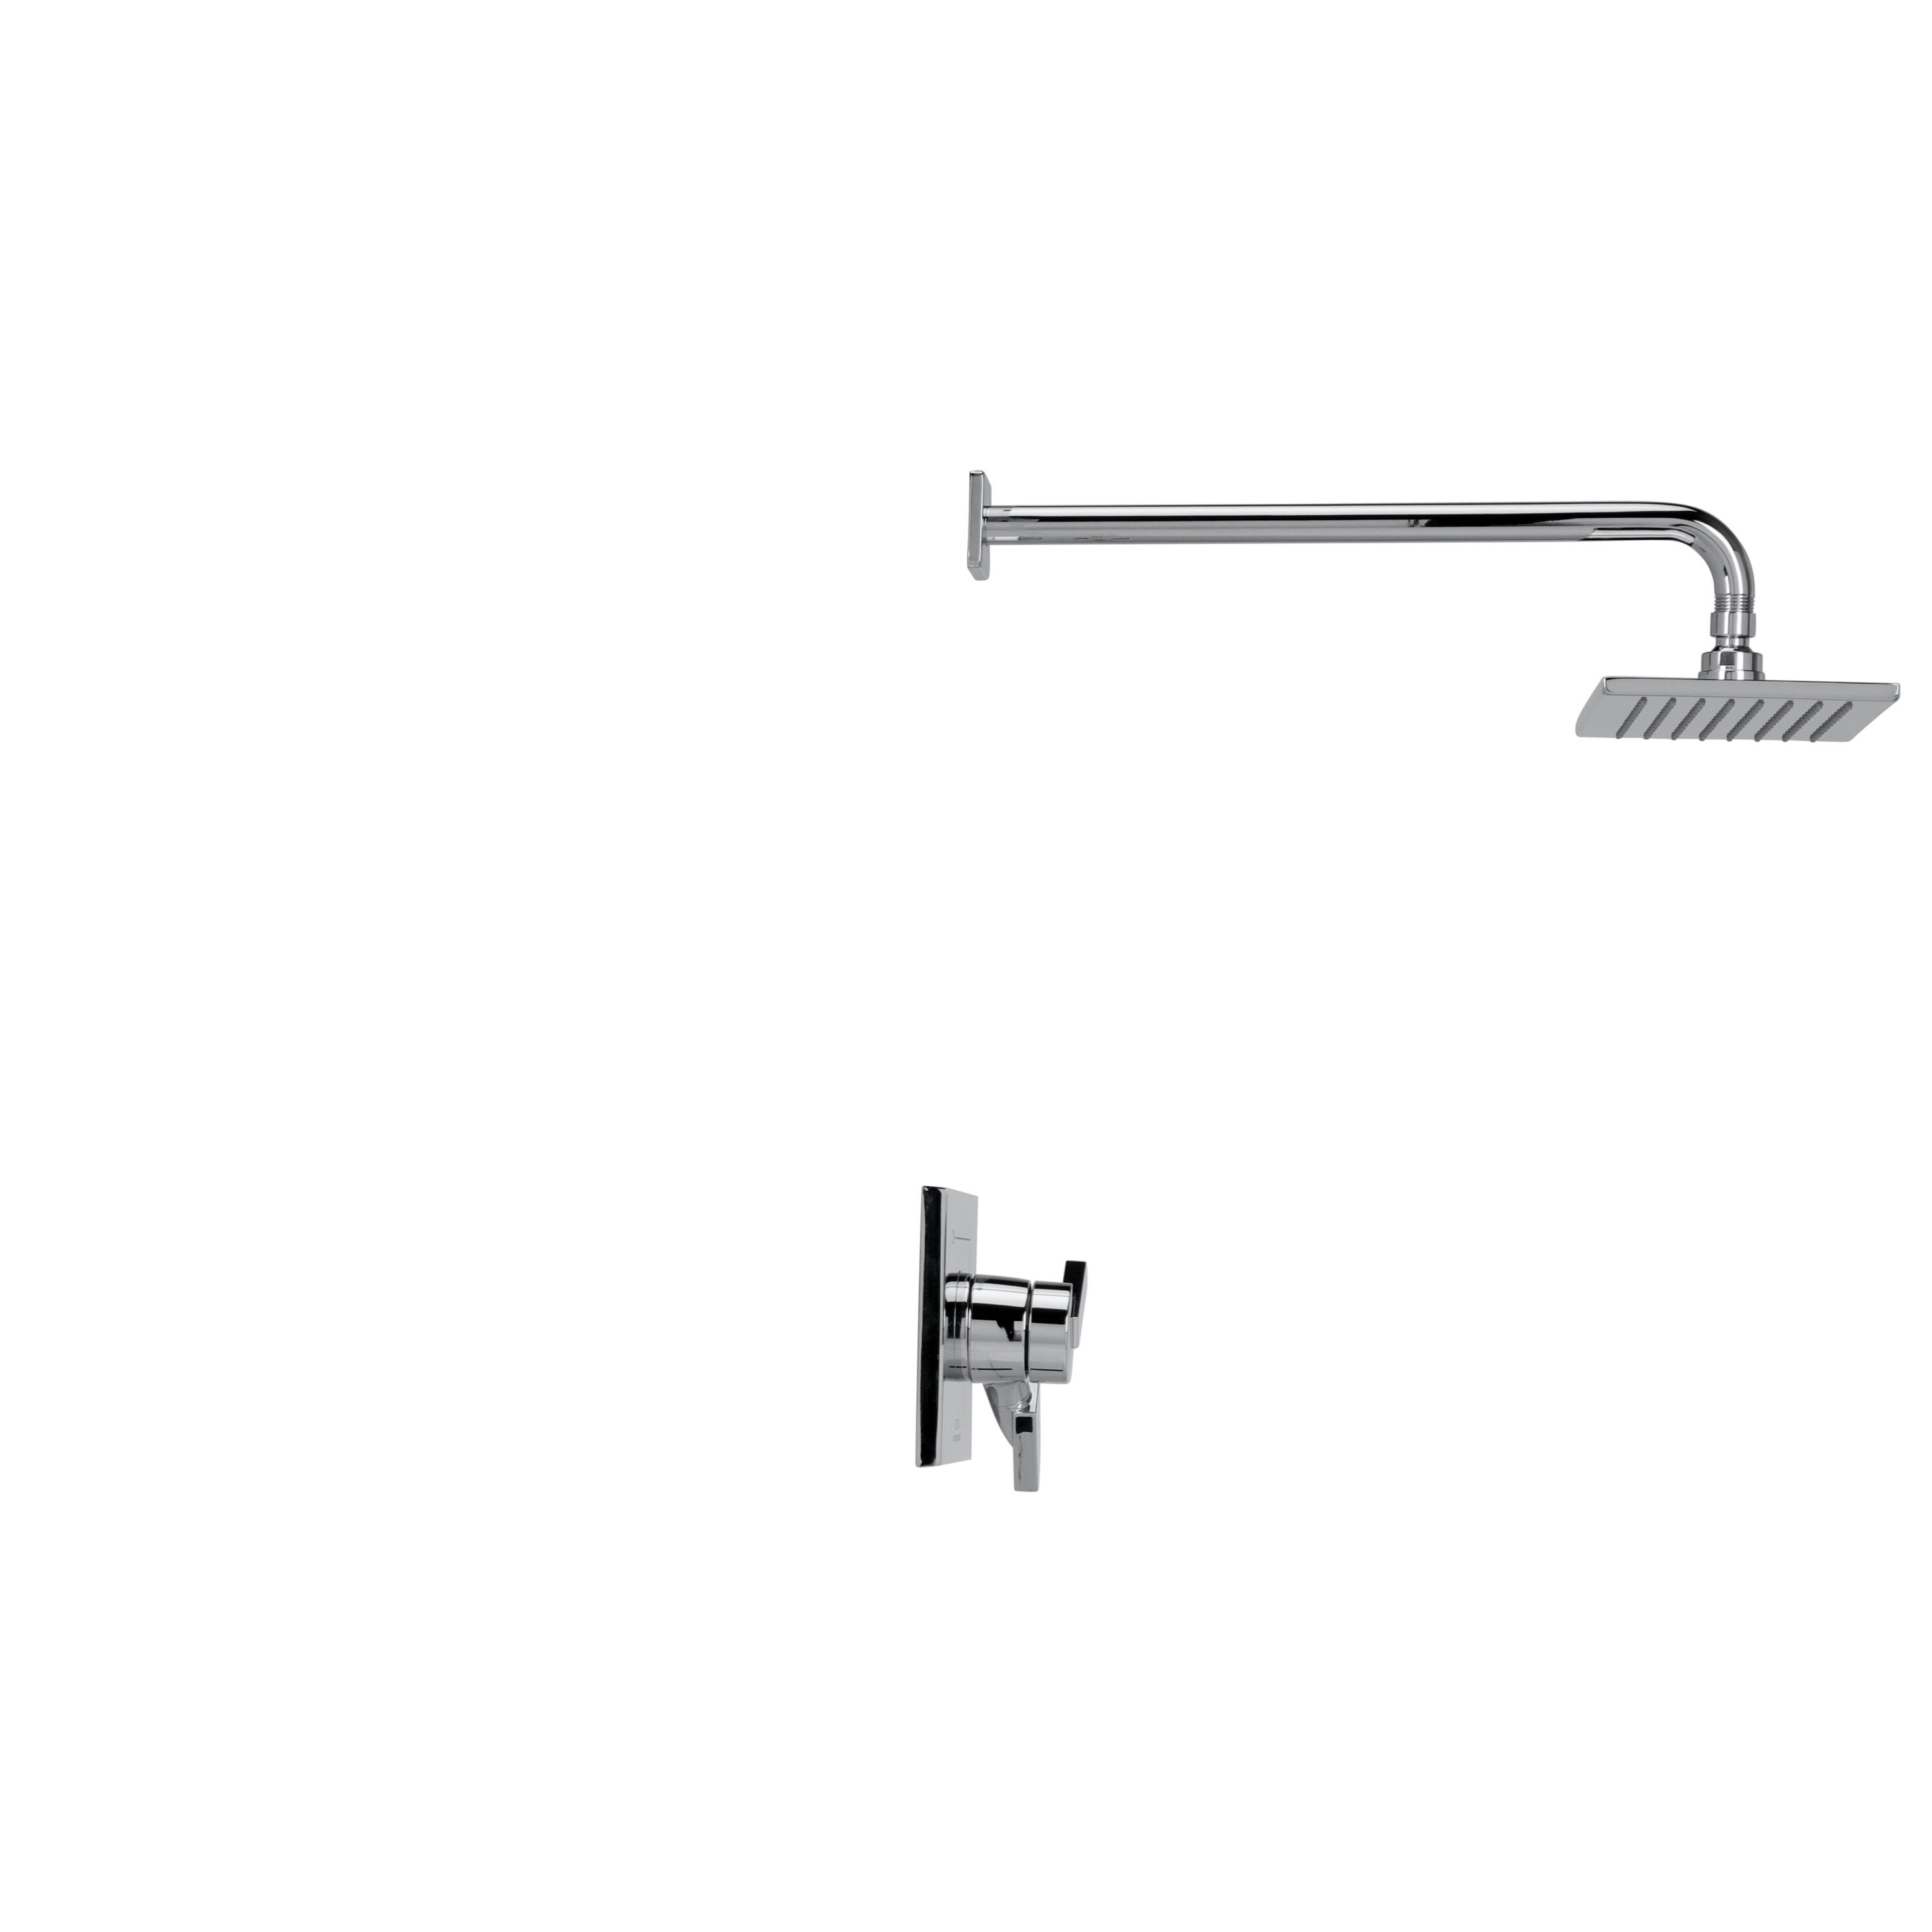 Monitor® 17 Series Shower Trim in Chrome T17253 | Delta Faucet